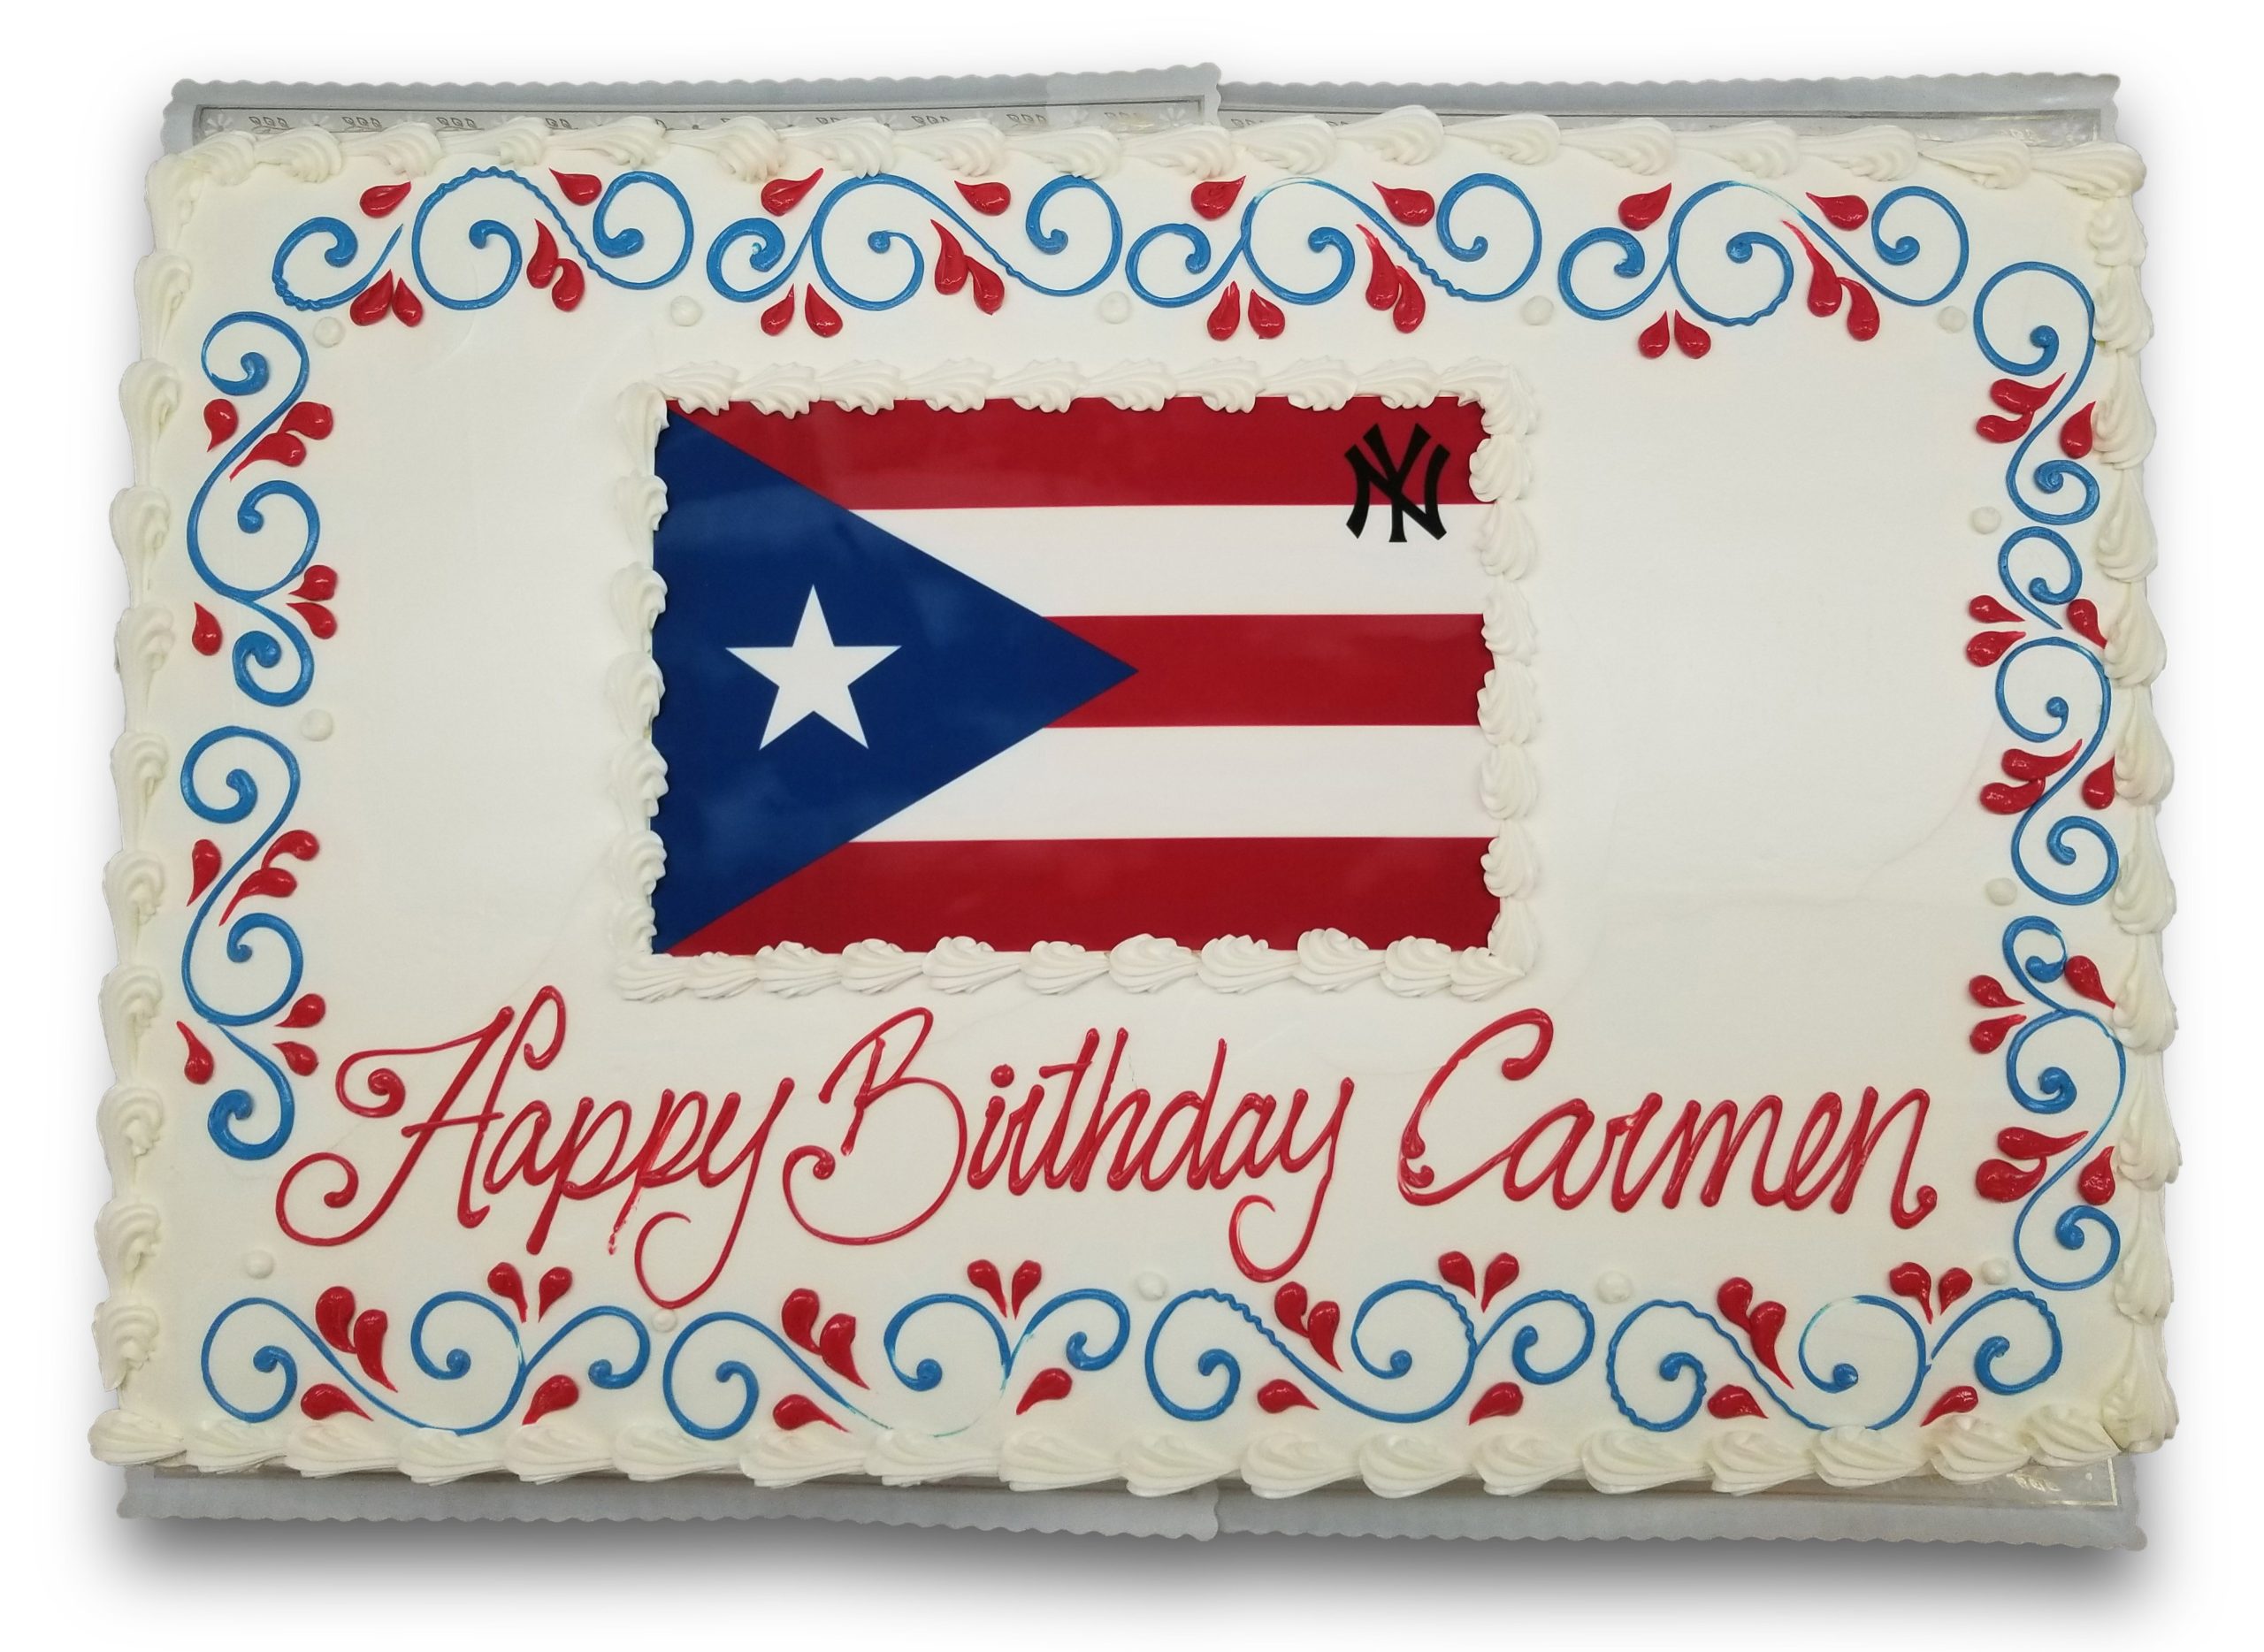 AB027. Puerto Rican flag scan birthday cake with multicolored scrolls